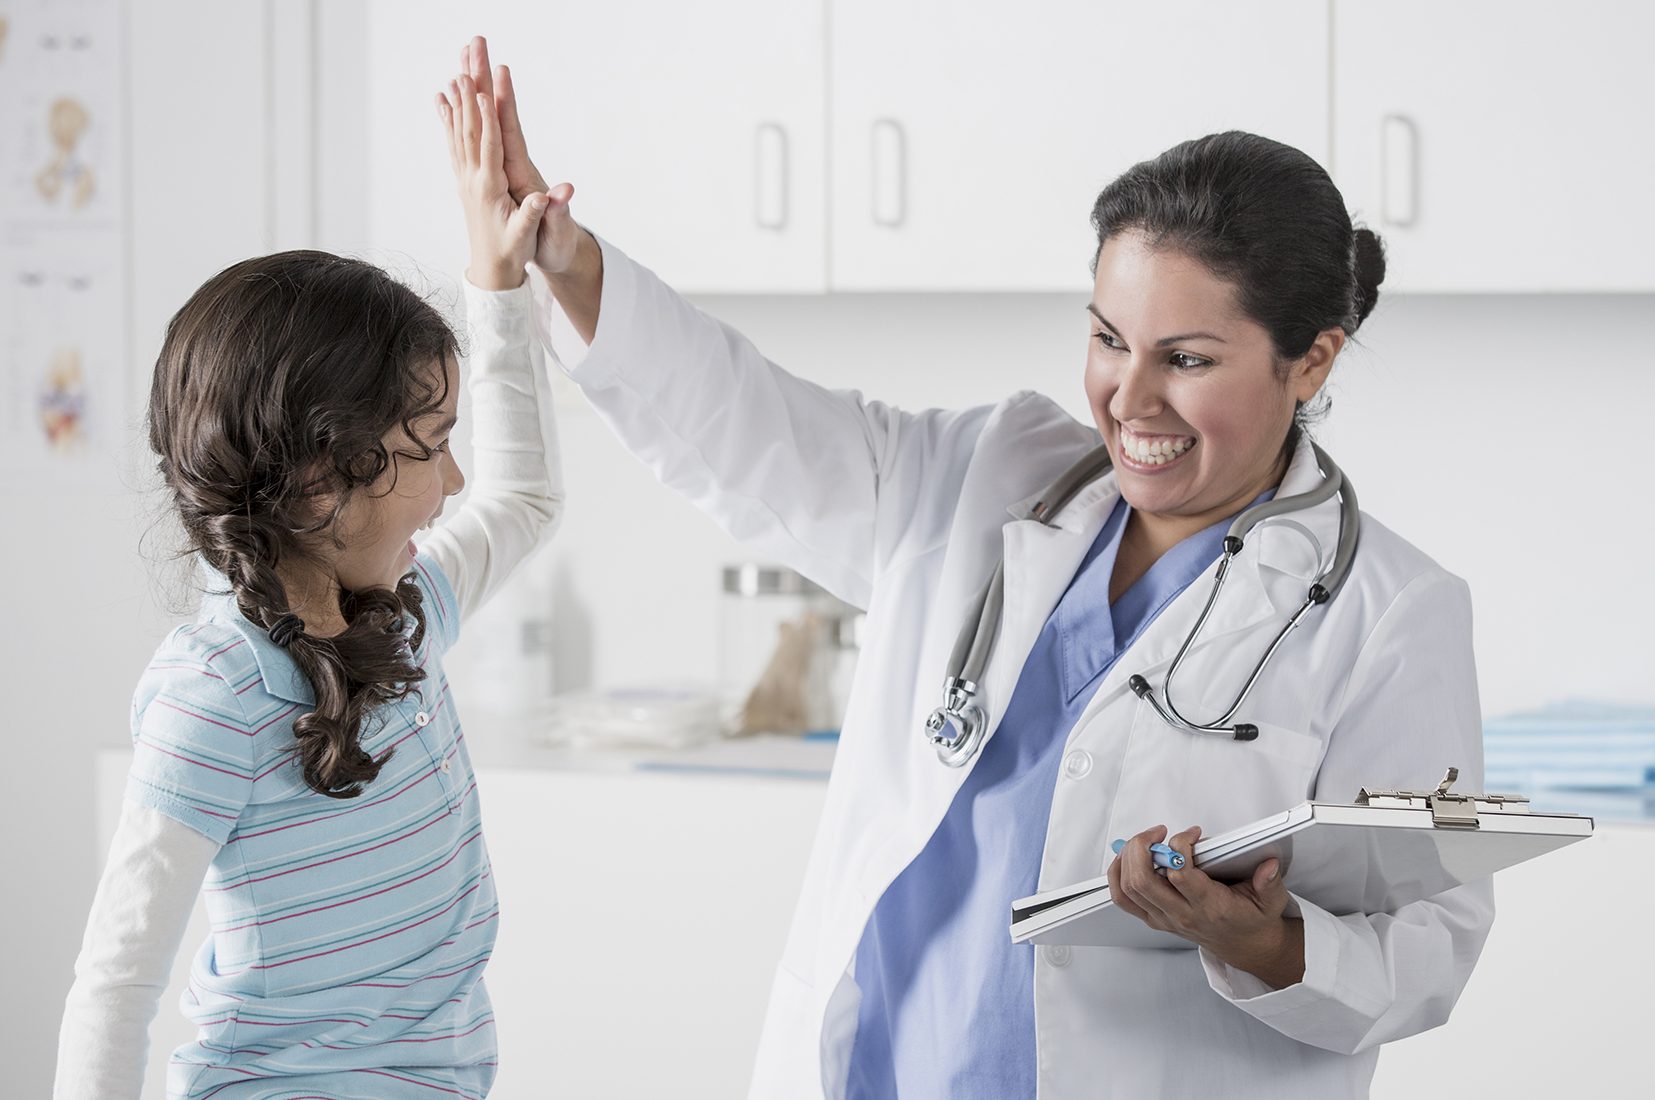 Child Doctor High Five